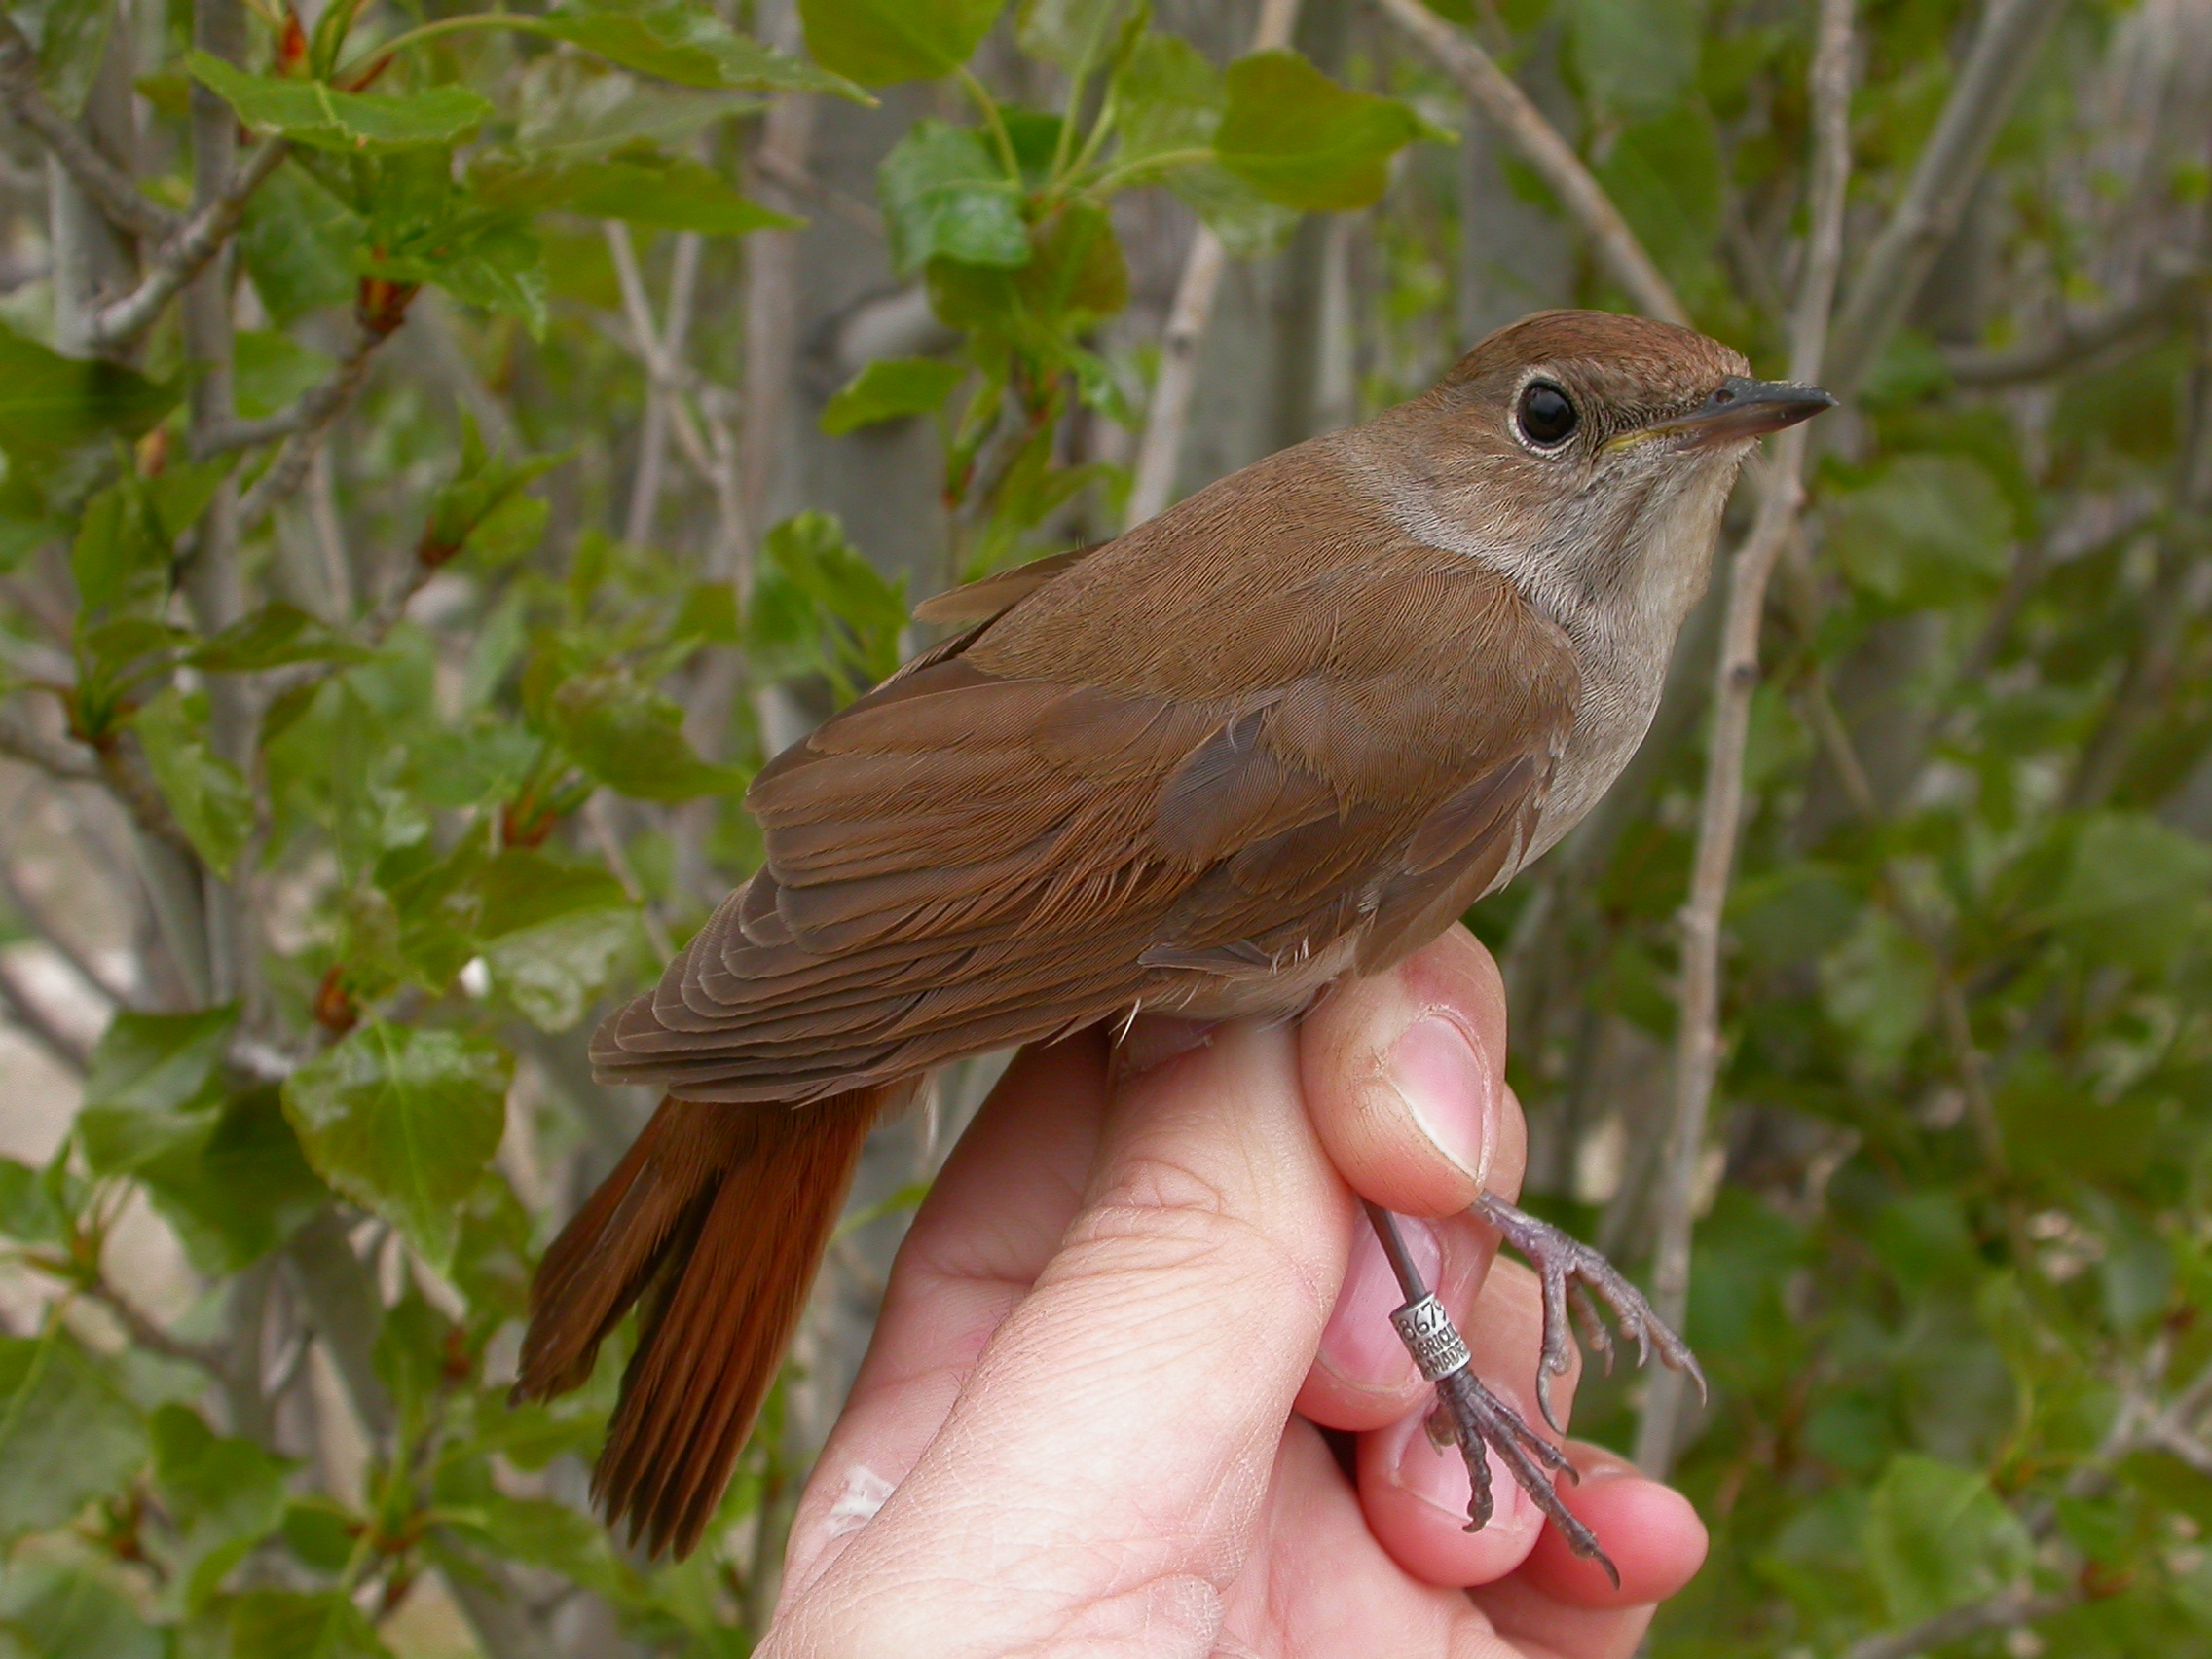 a brown songbird being held in a researcher's hand